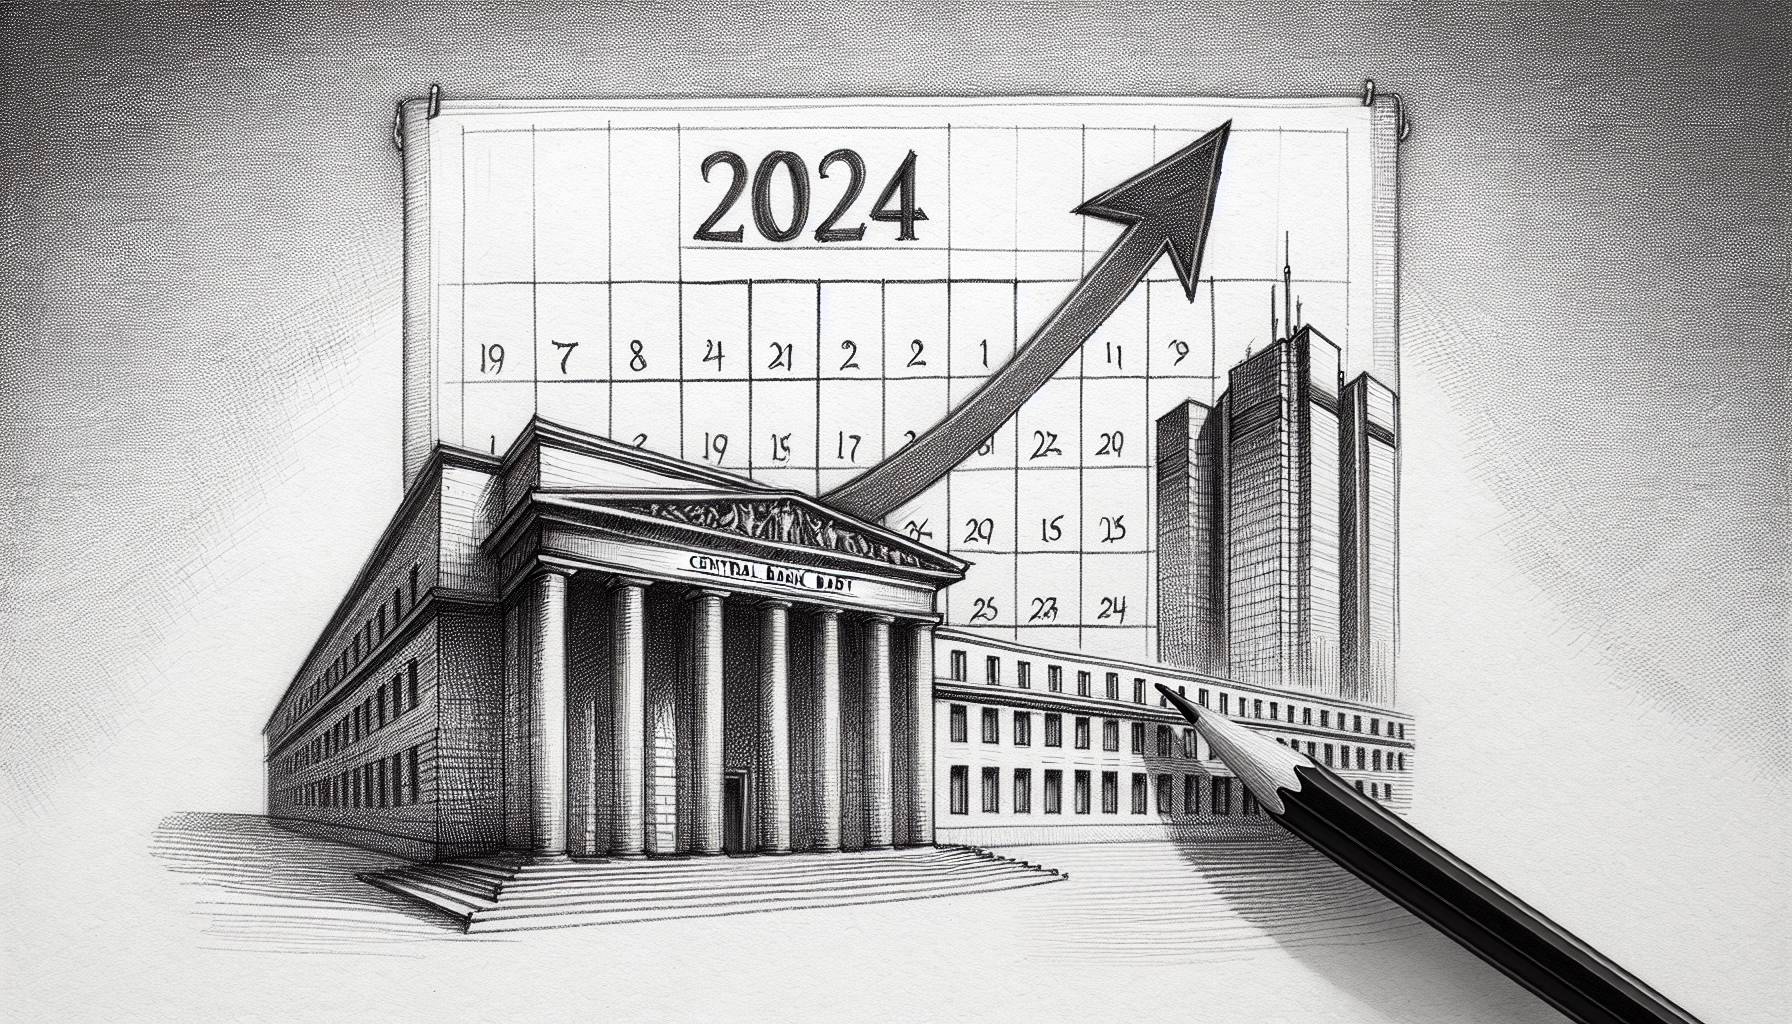 "Rate Rise 2024"